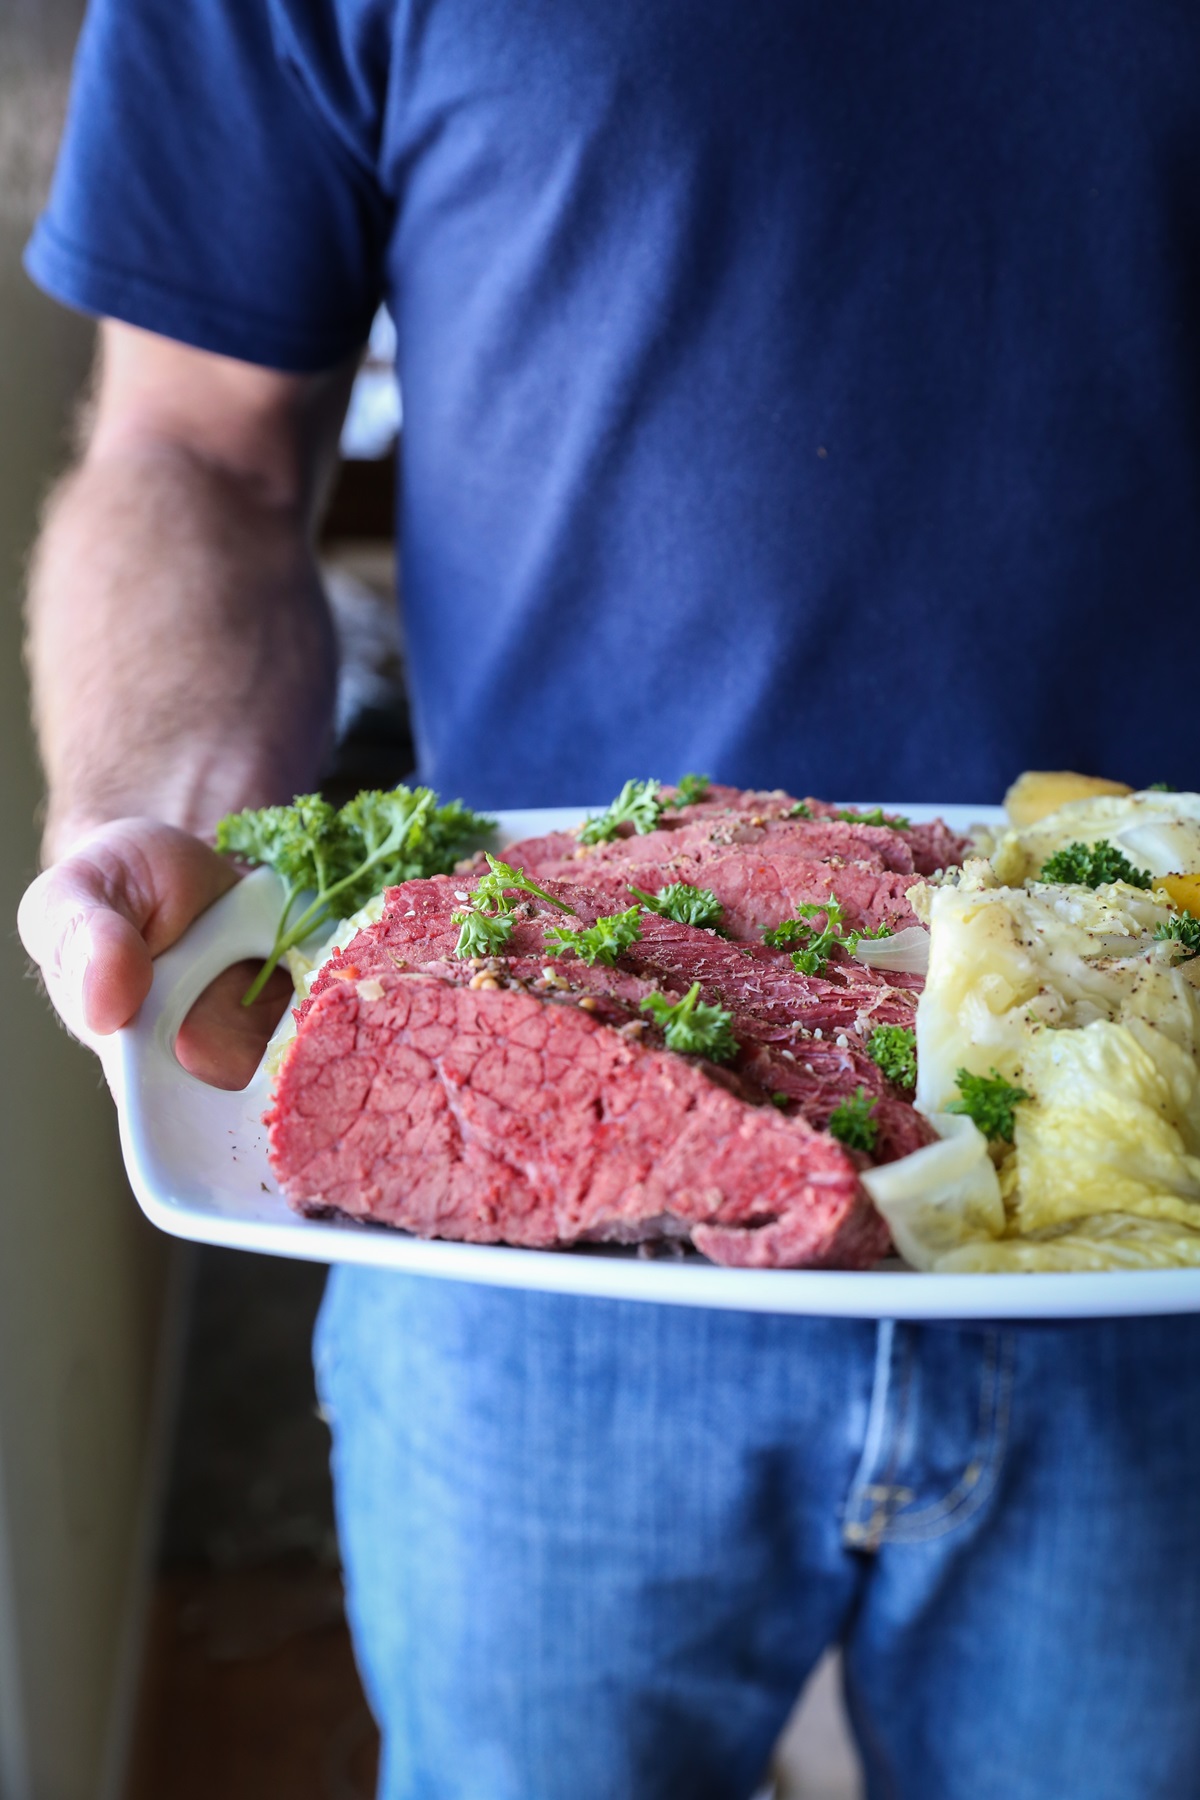 Man holding a plate of corned beef and cabbage, ready to serve.